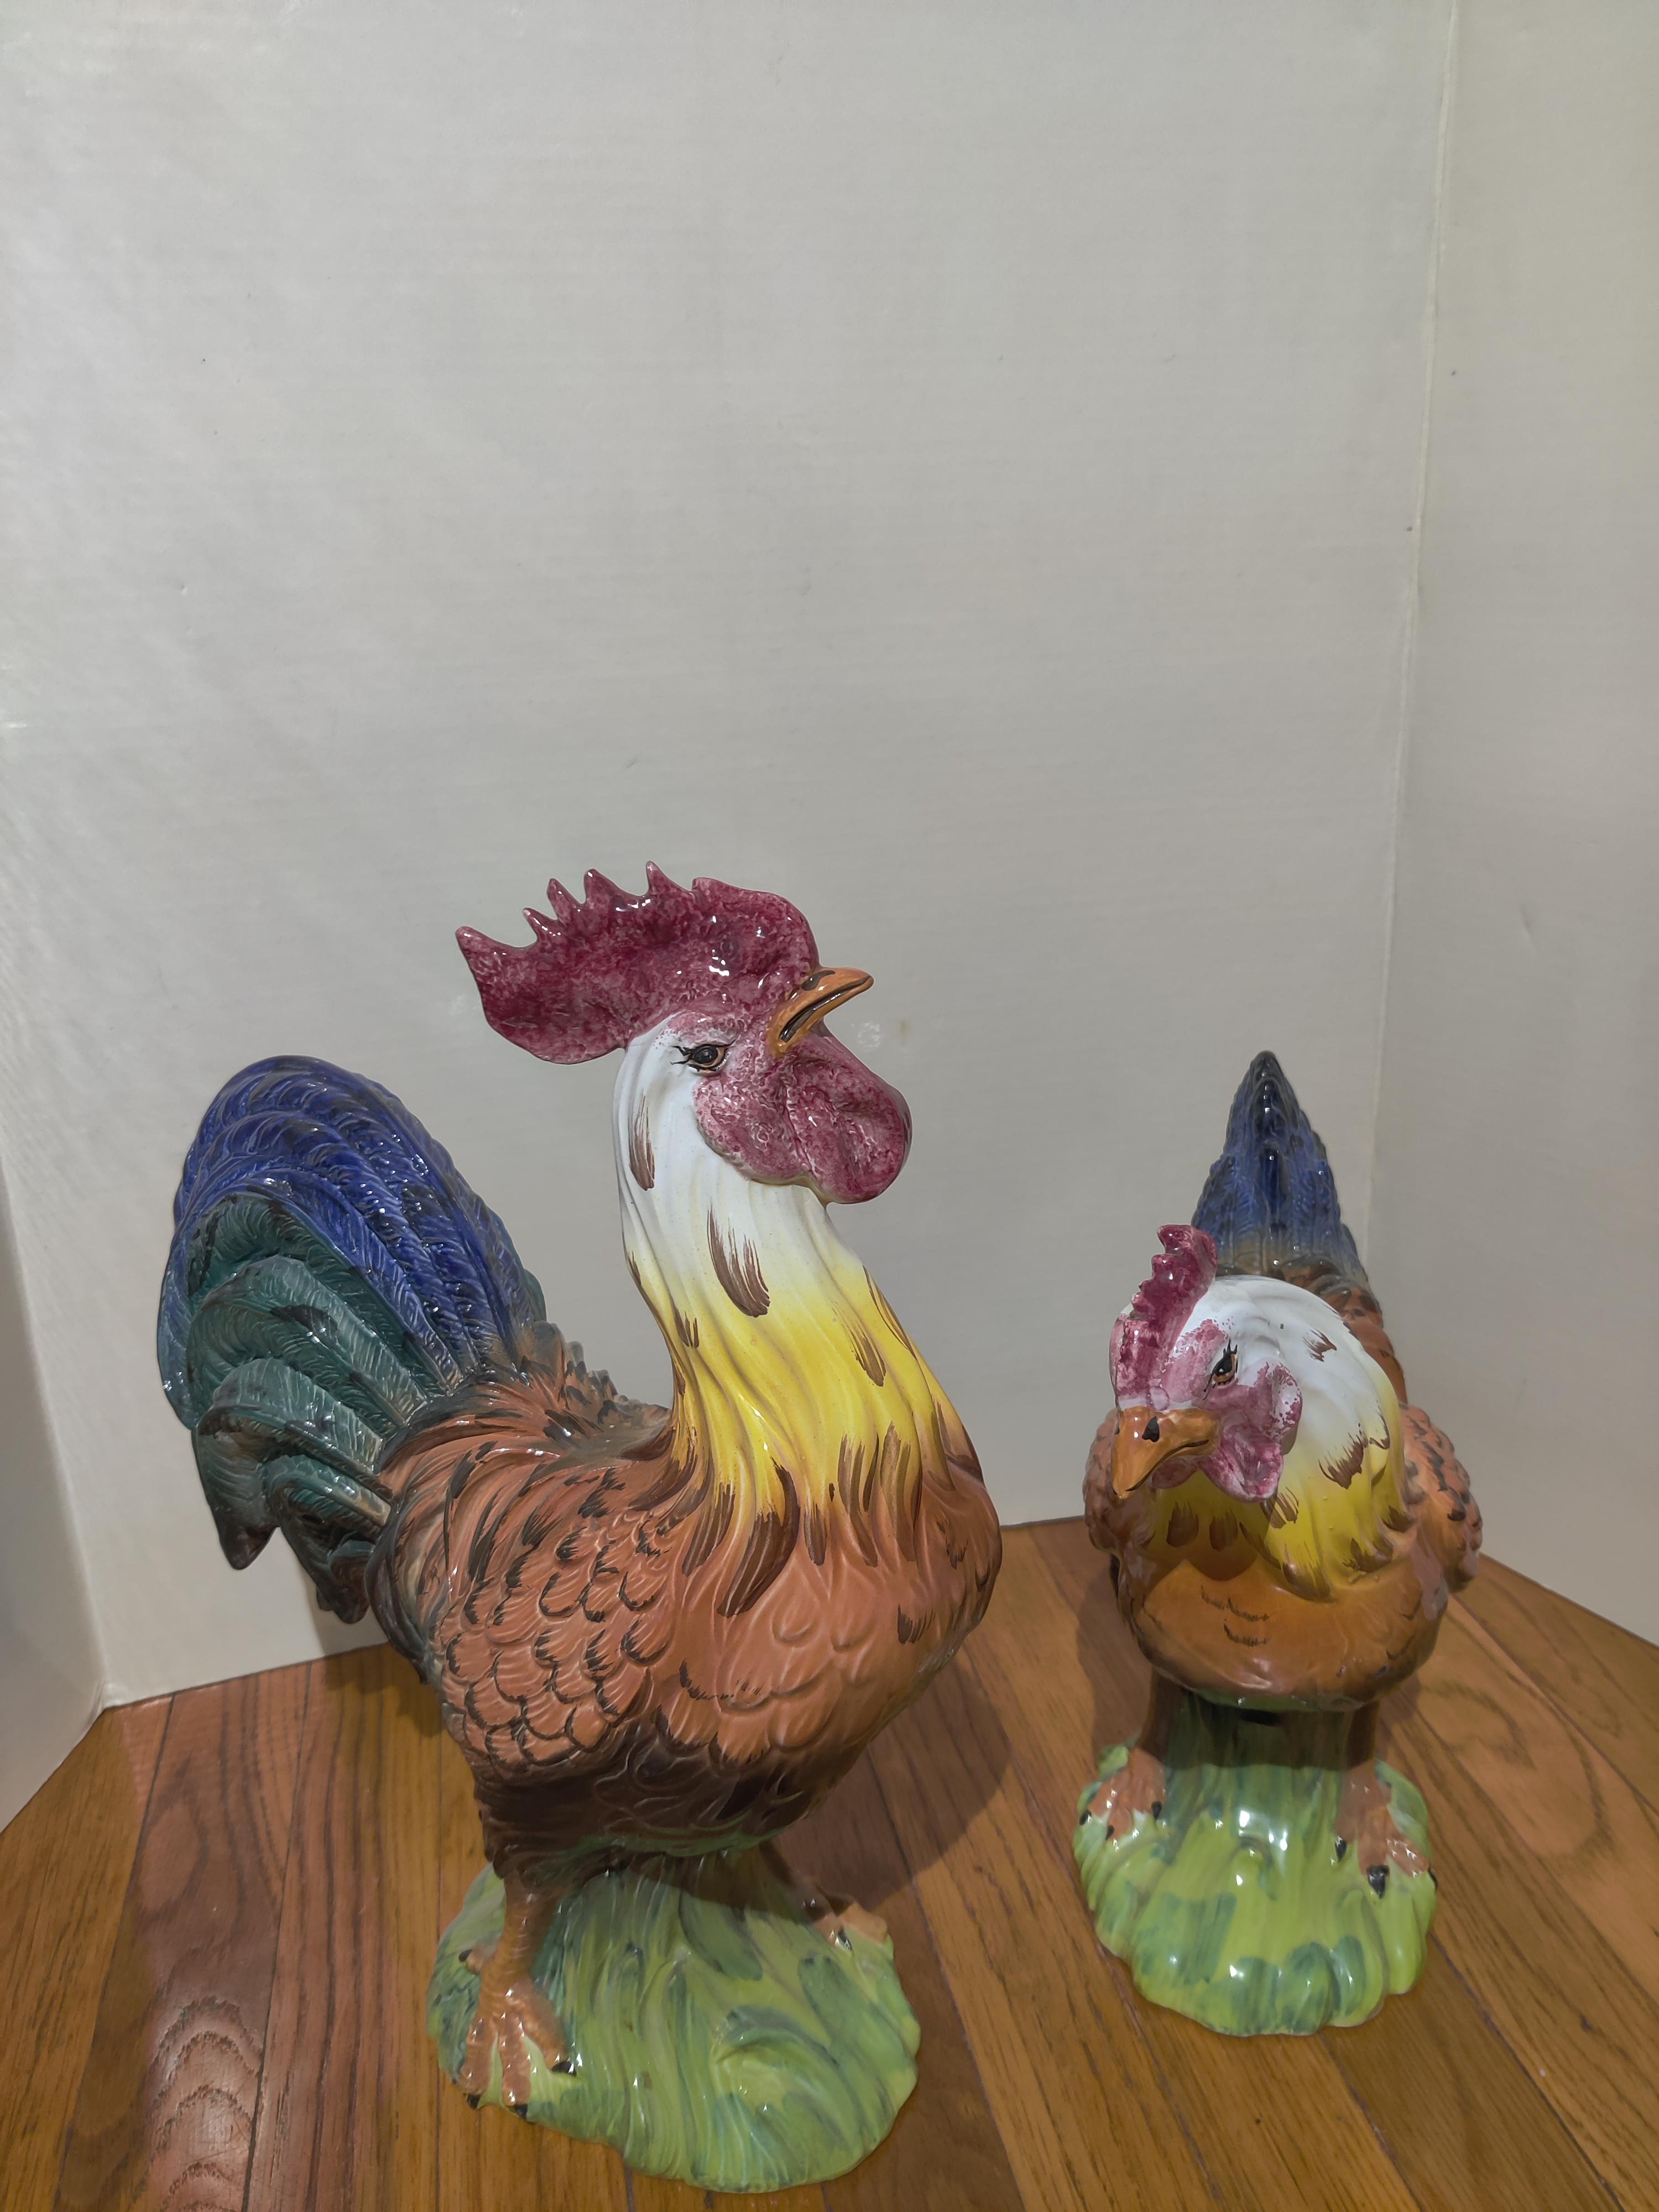 Ceramic Intrada Rooster and Hen Made in Italy
Hen dimensions 12 H x 11.24 L X 5.5 W
